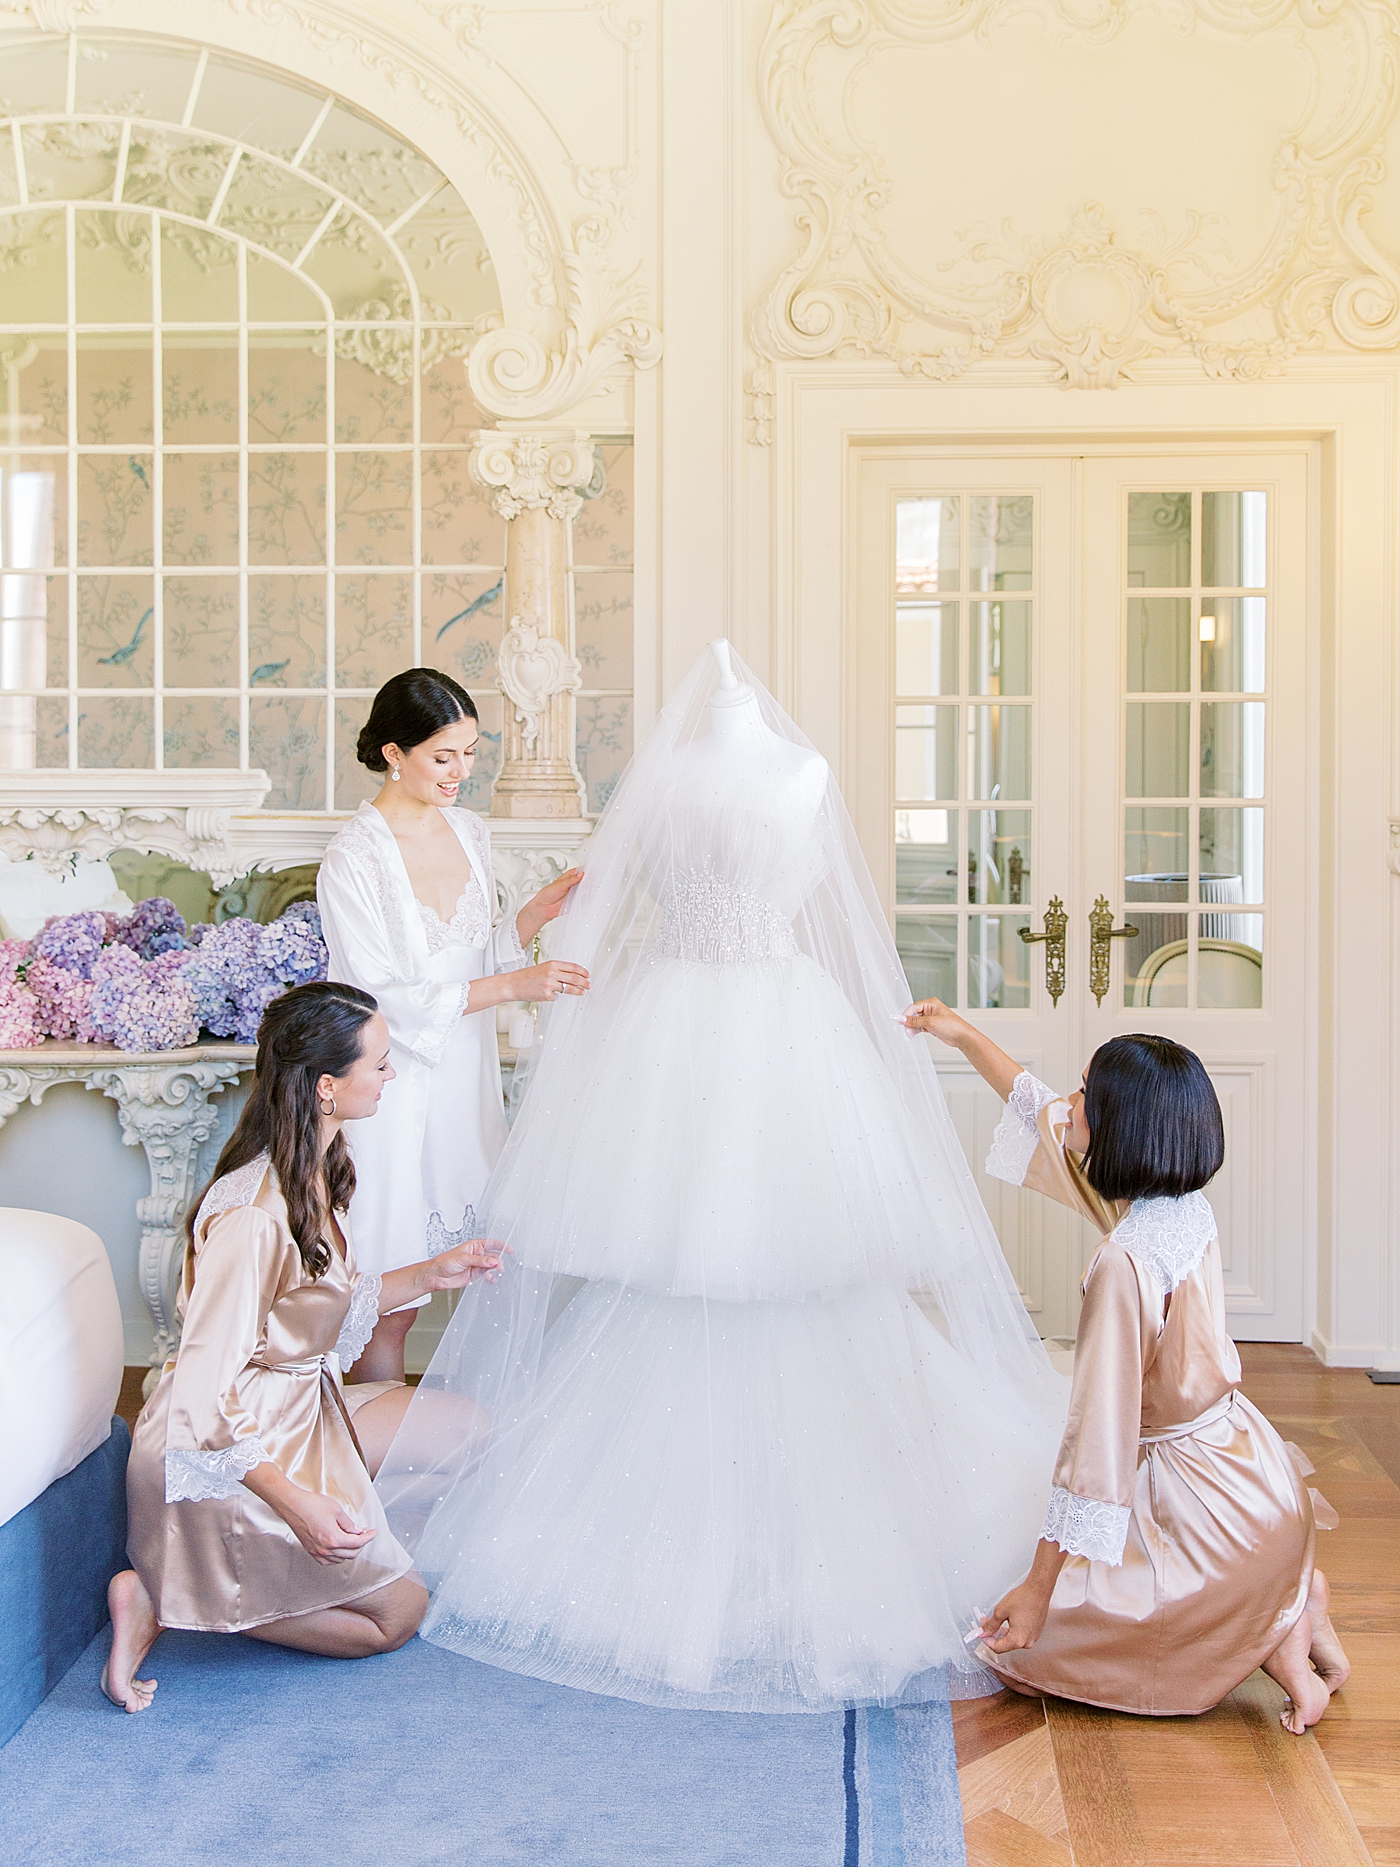 Bride and bridesmaids admiring the gown | Image by Diane Sotero